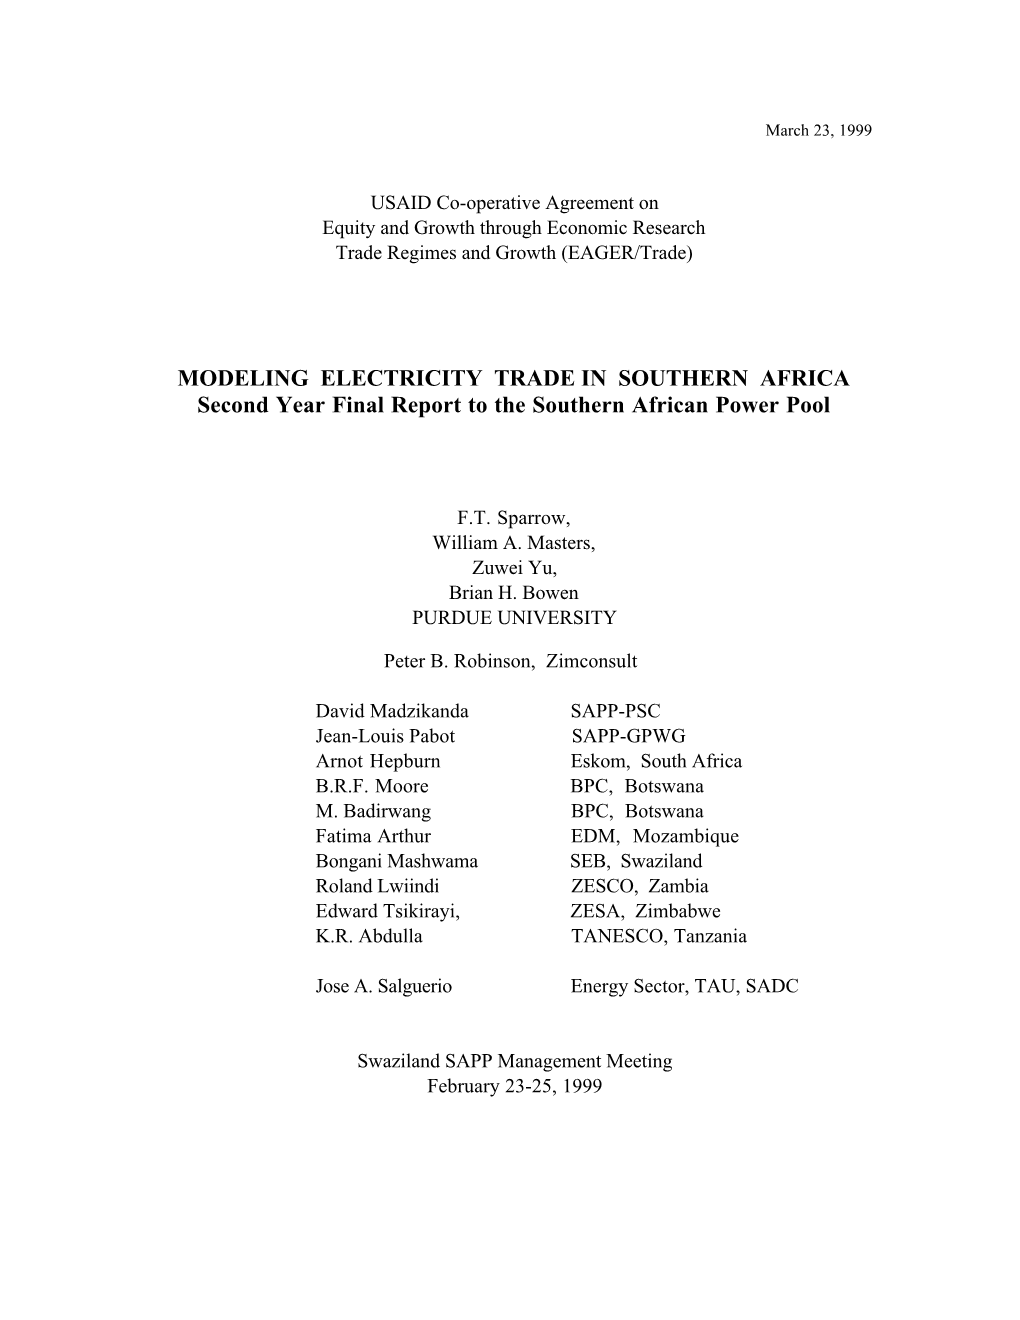 MODELING ELECTRICITY TRADE in SOUTHERN AFRICA Second Year Final Report to the Southern African Power Pool